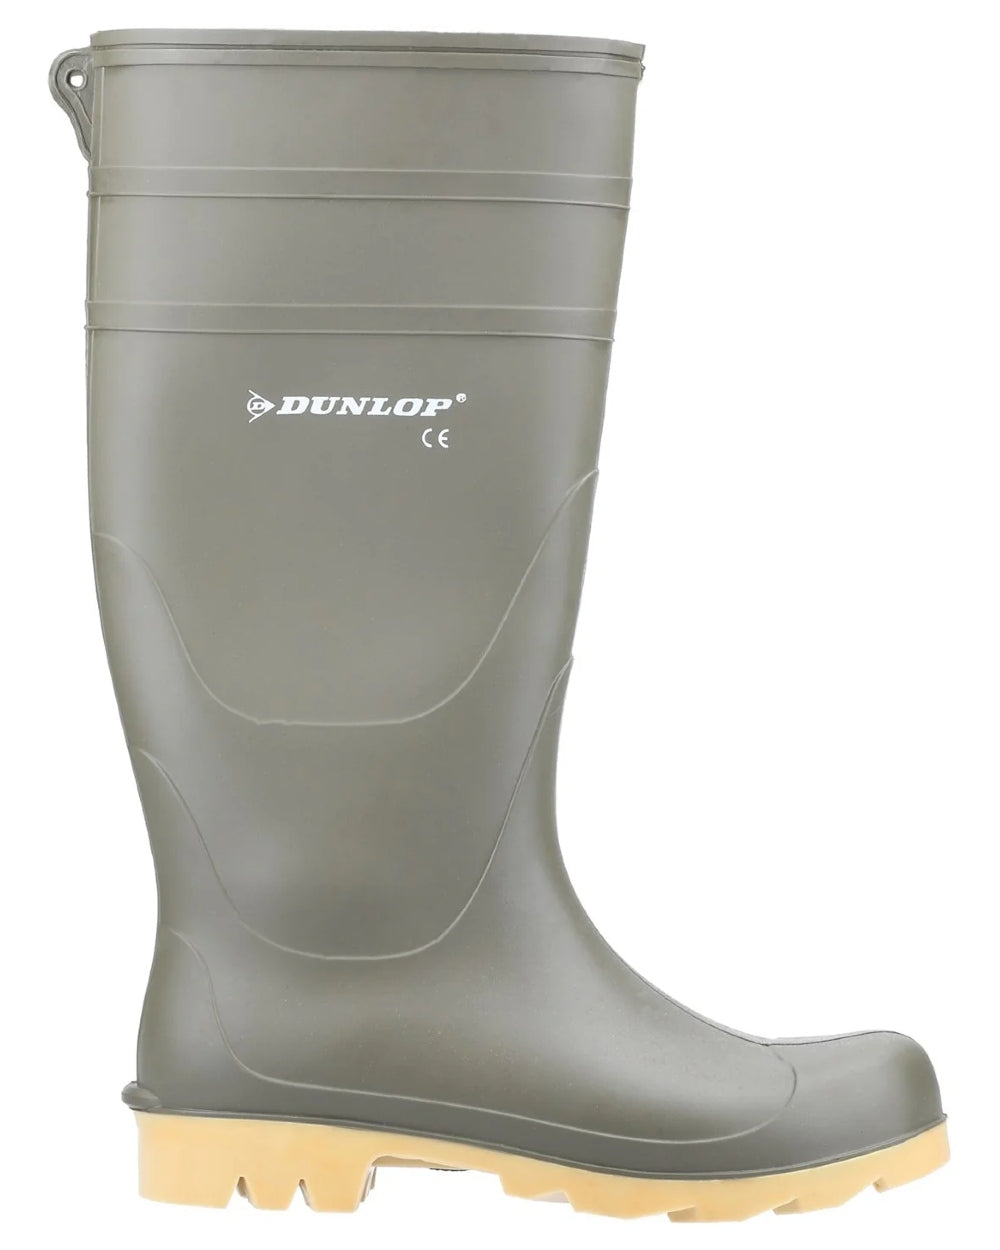 Green coloured Dunlop Universal Wellingtons on white background 